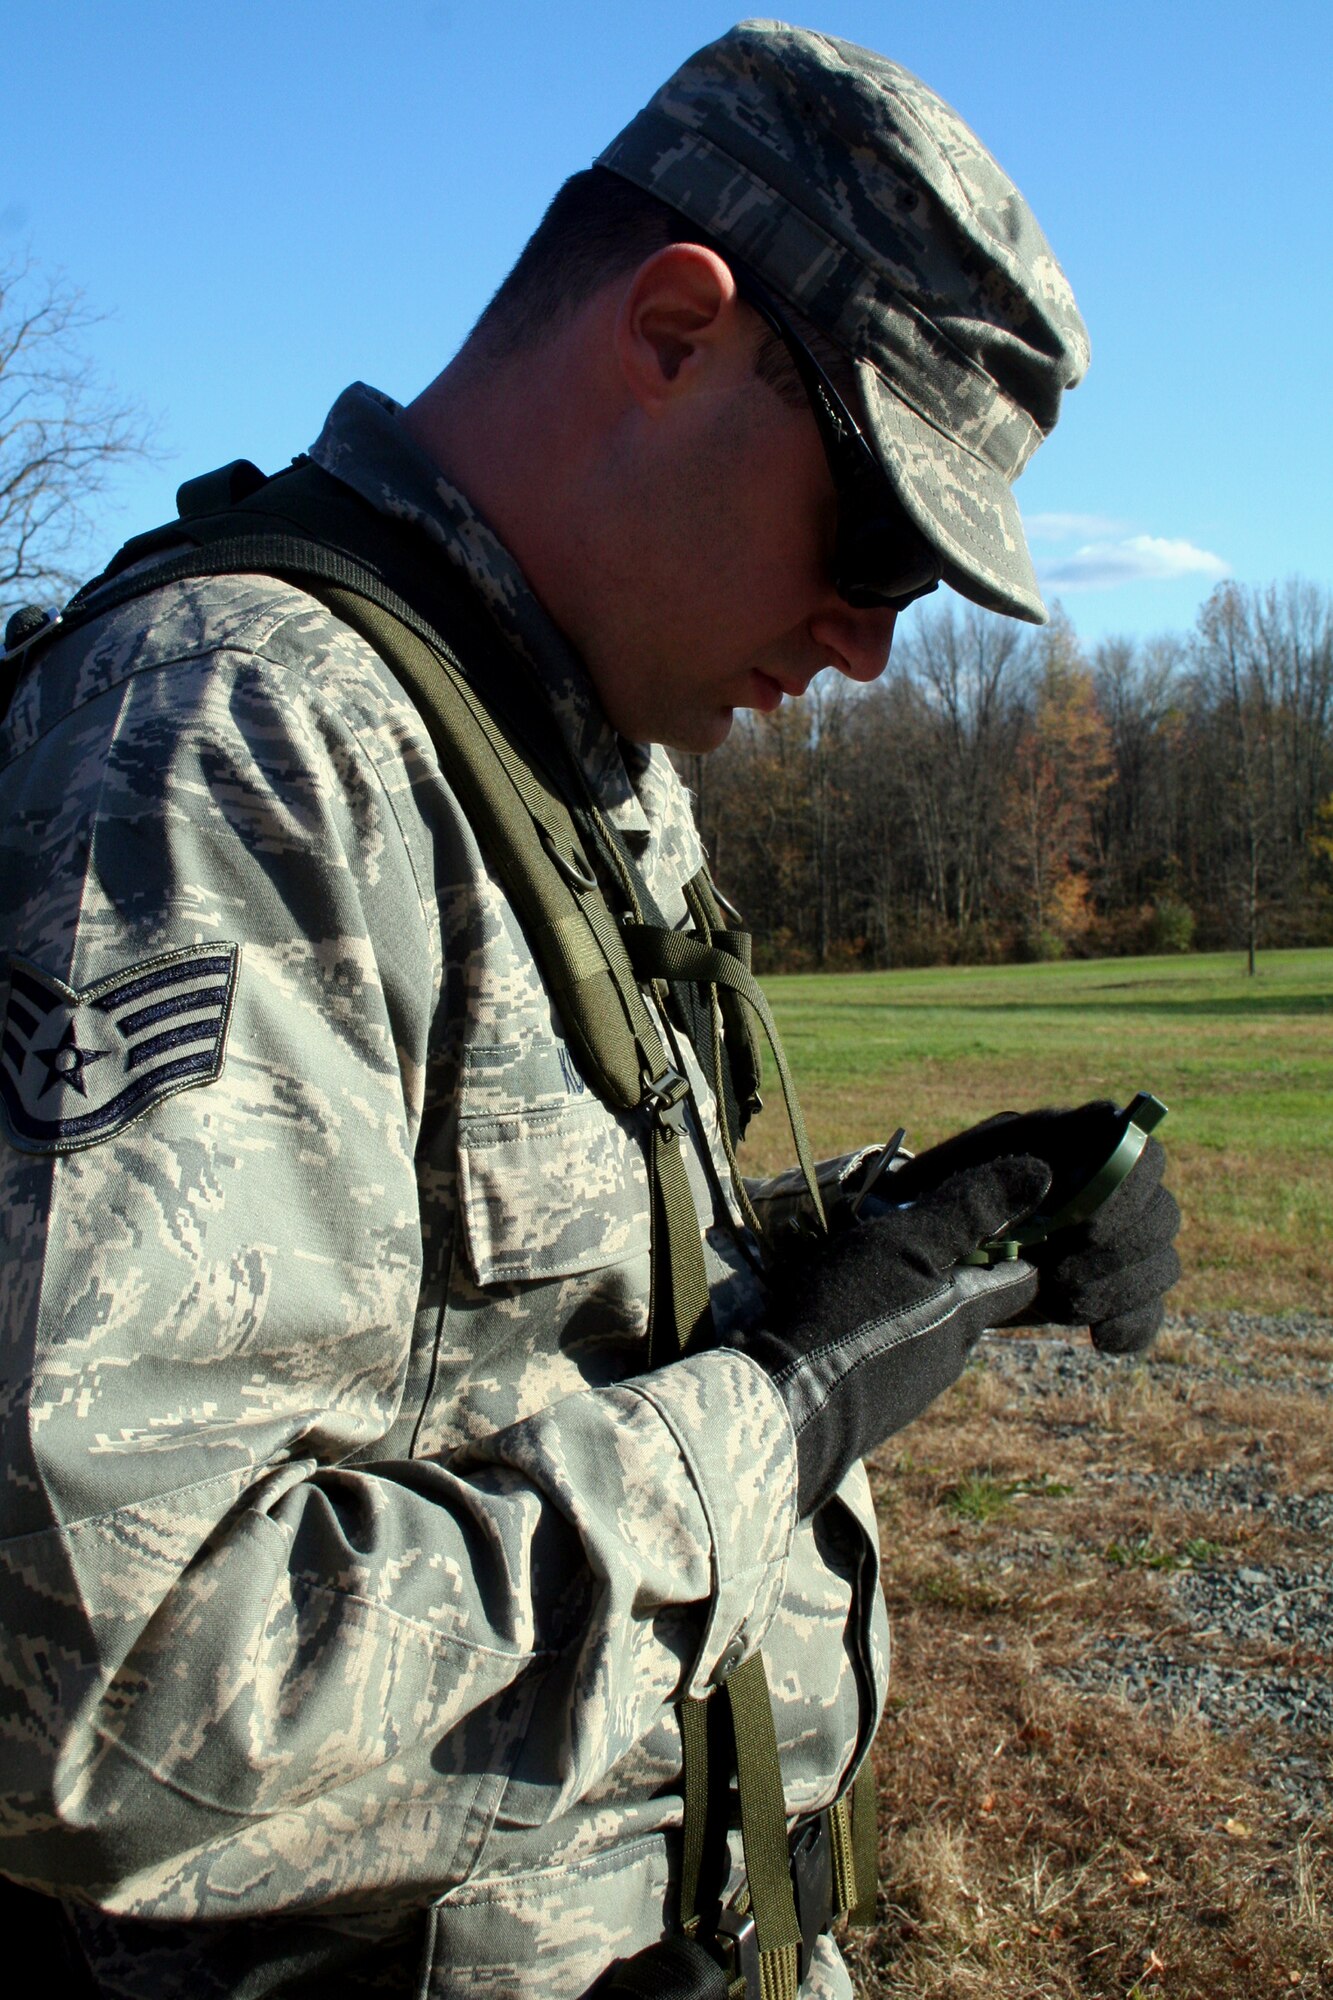 A student in the Combat Airman Skills Training Course 10-1A, taught by the U.S. Air Force Expeditionary Center's 421st Combat Training Squadron, prepares a compass for a day of land navigation training in the course on a range at Joint Base McGuire-Dix-Lakehurst, N.J., on Nov. 6, 2009.  The course prepares Airmen for upcoming deployments.  (U.S. Air Force Photo/Tech. Sgt. Scott T. Sturkol)